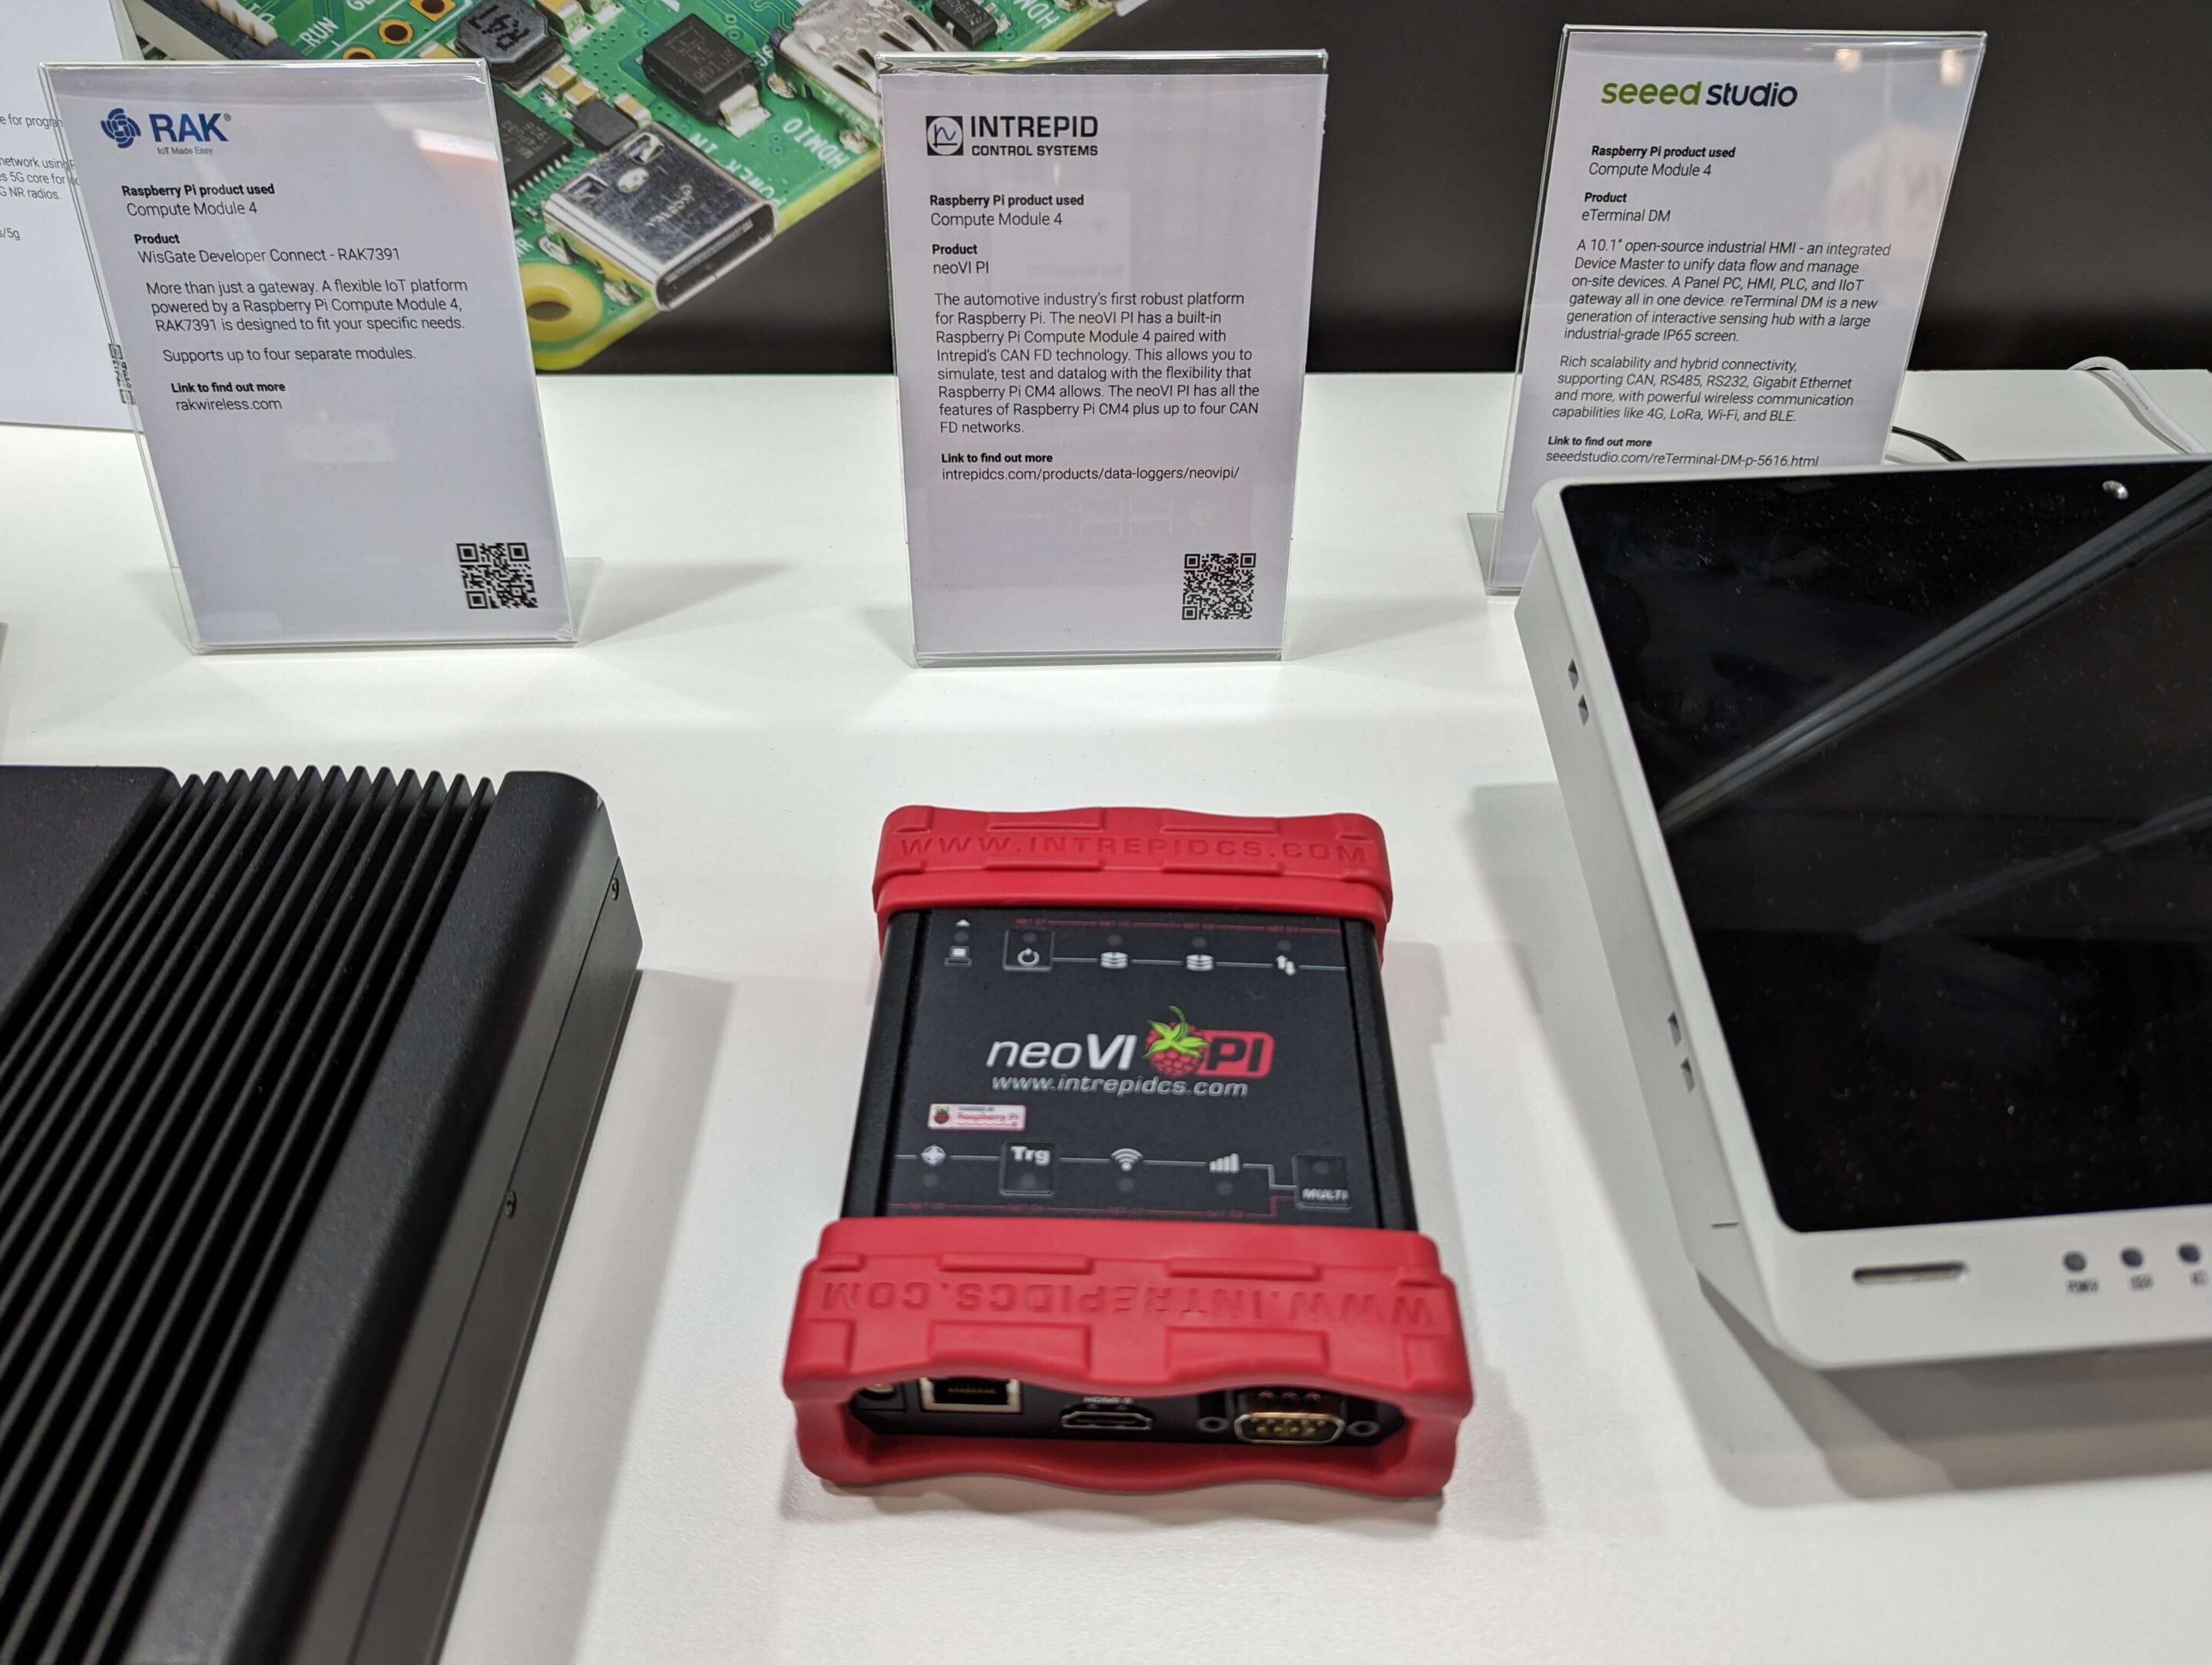 Intrepid's neoVI PI Product Showcased at Raspberry Pi's Booth in Embedded World 2023